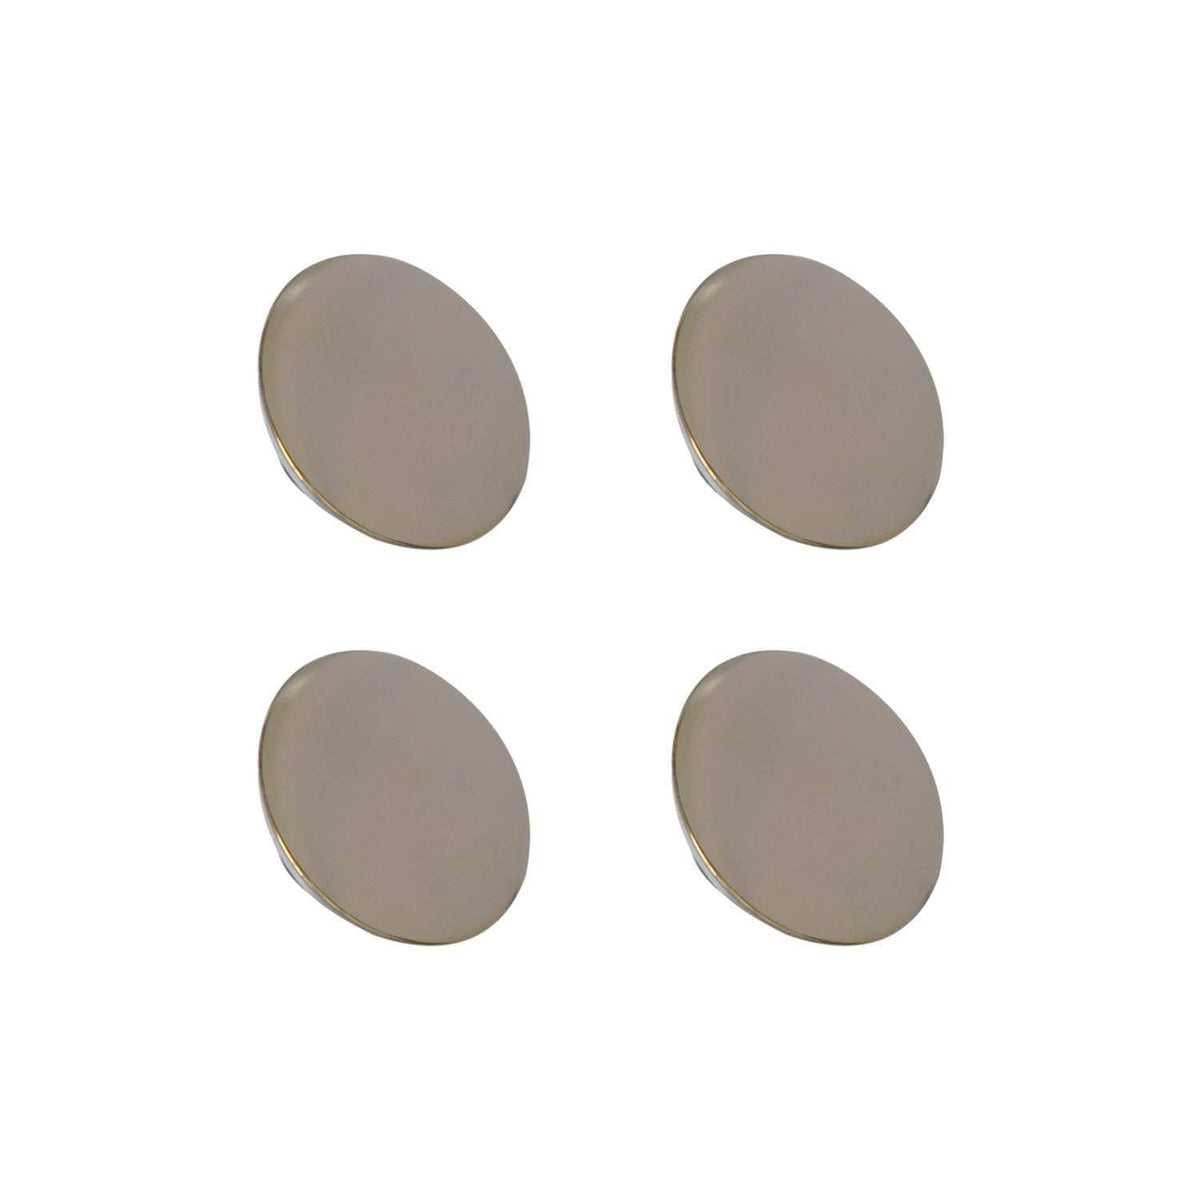 Chrome hob caps/buttons for use with Aga range cookers